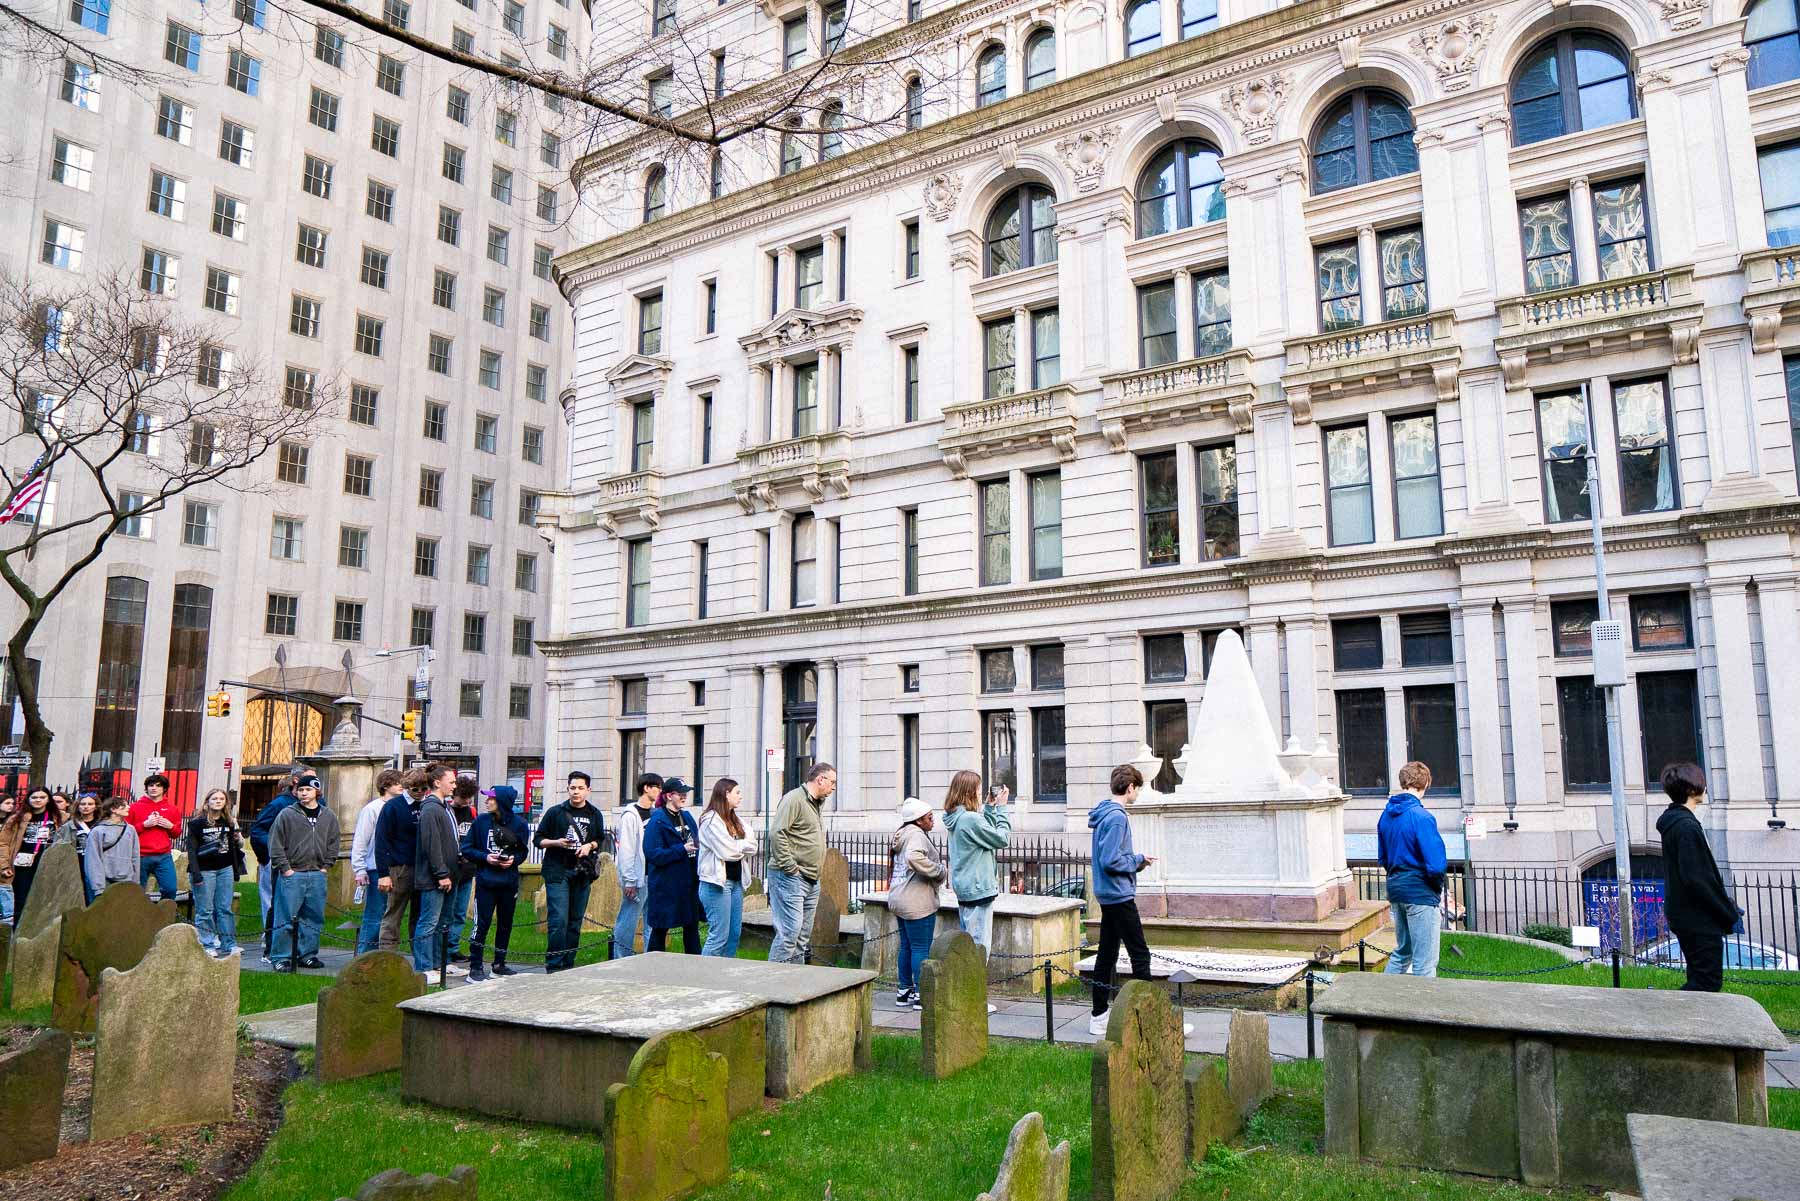 A tour lining up for photos of Alexander Hamilton's Grave in NYC